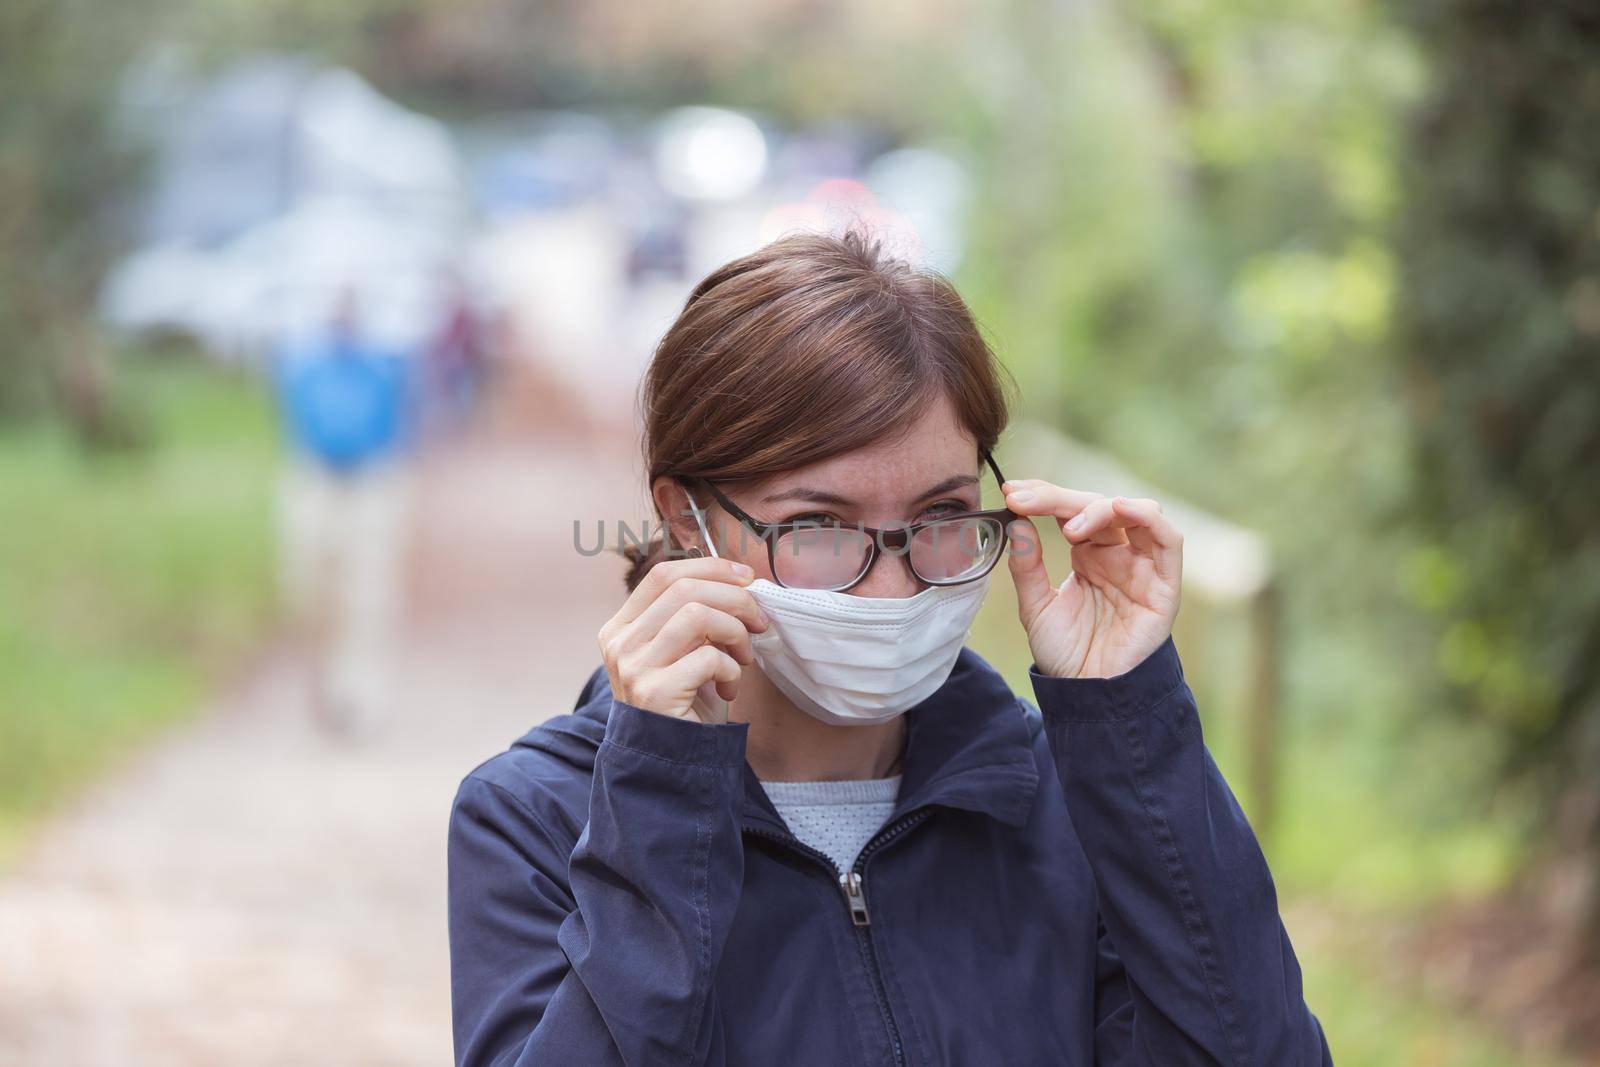 Young woman outdoors wearing a face mask and glasses, tarnished glasses